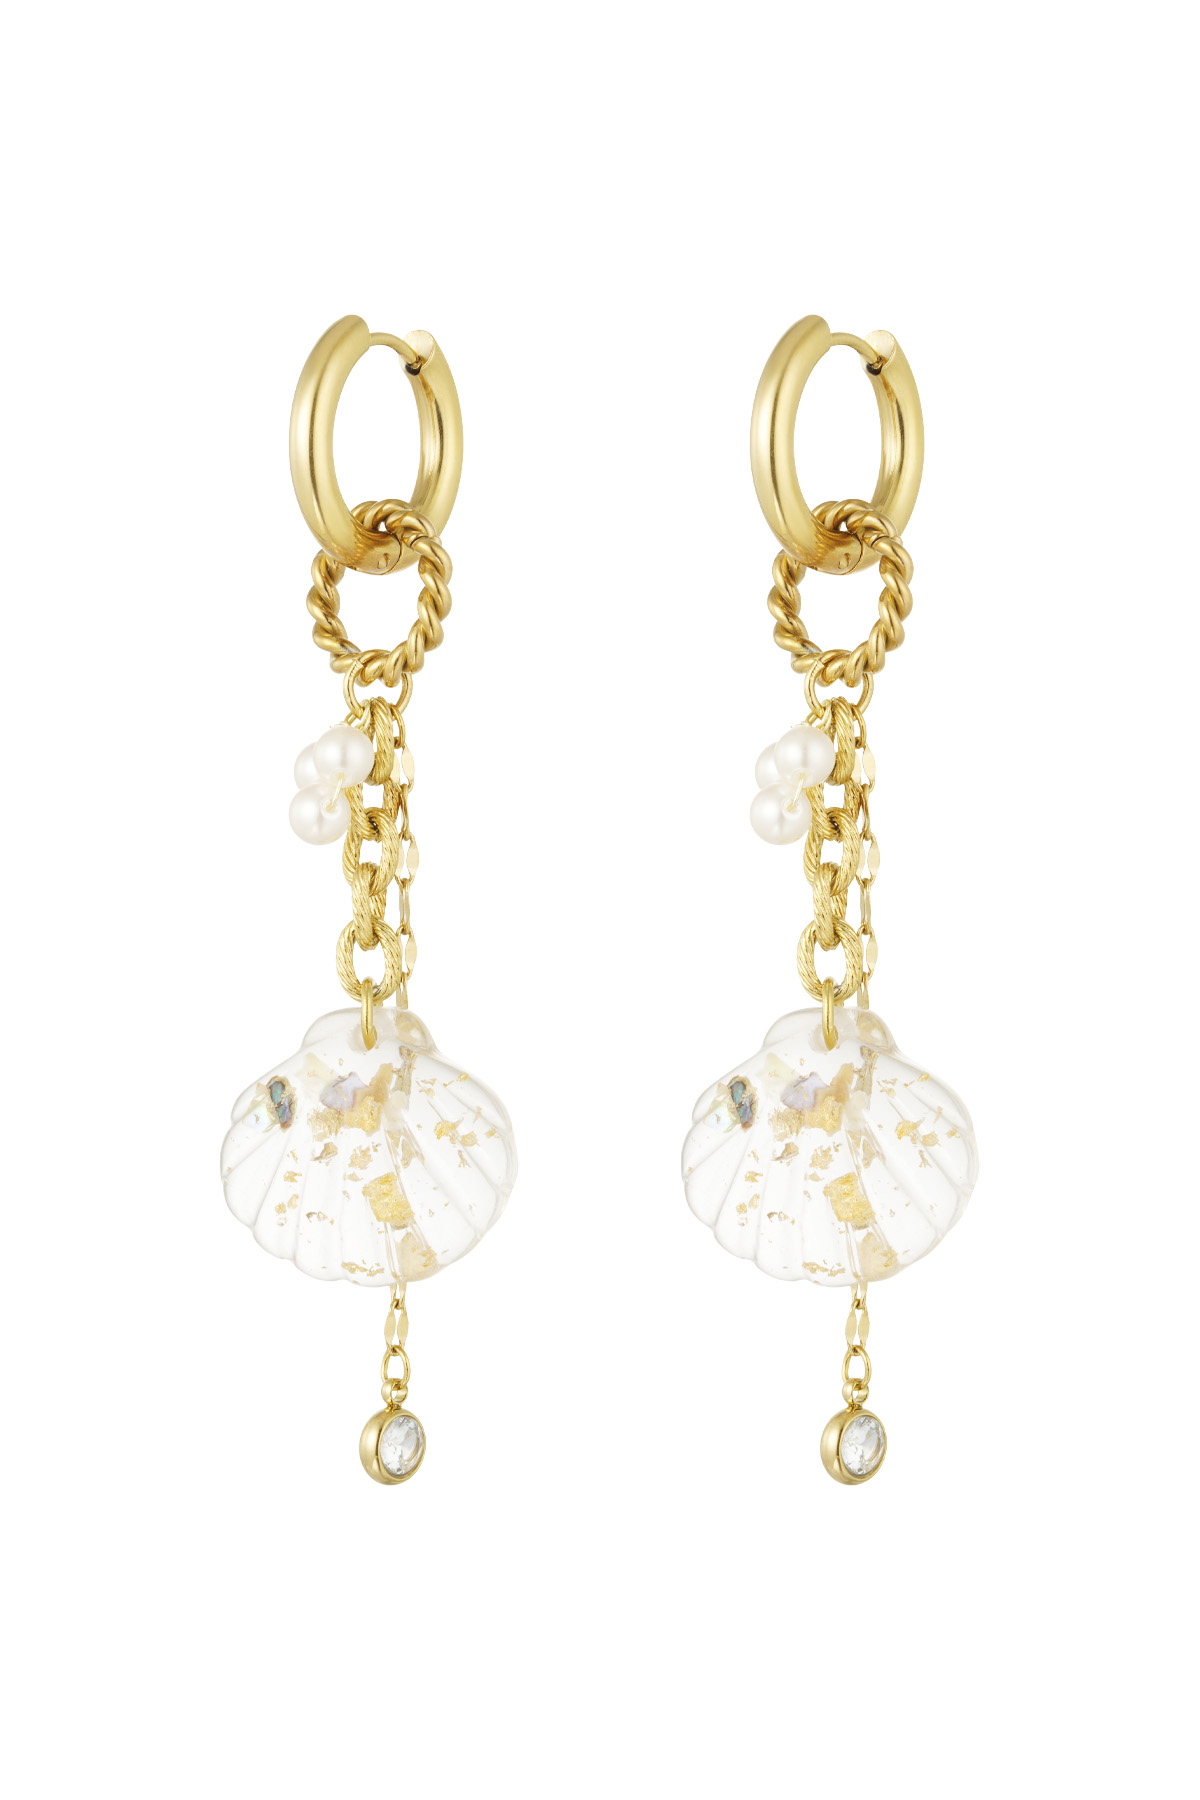 Shell earrings with charms - gold h5 